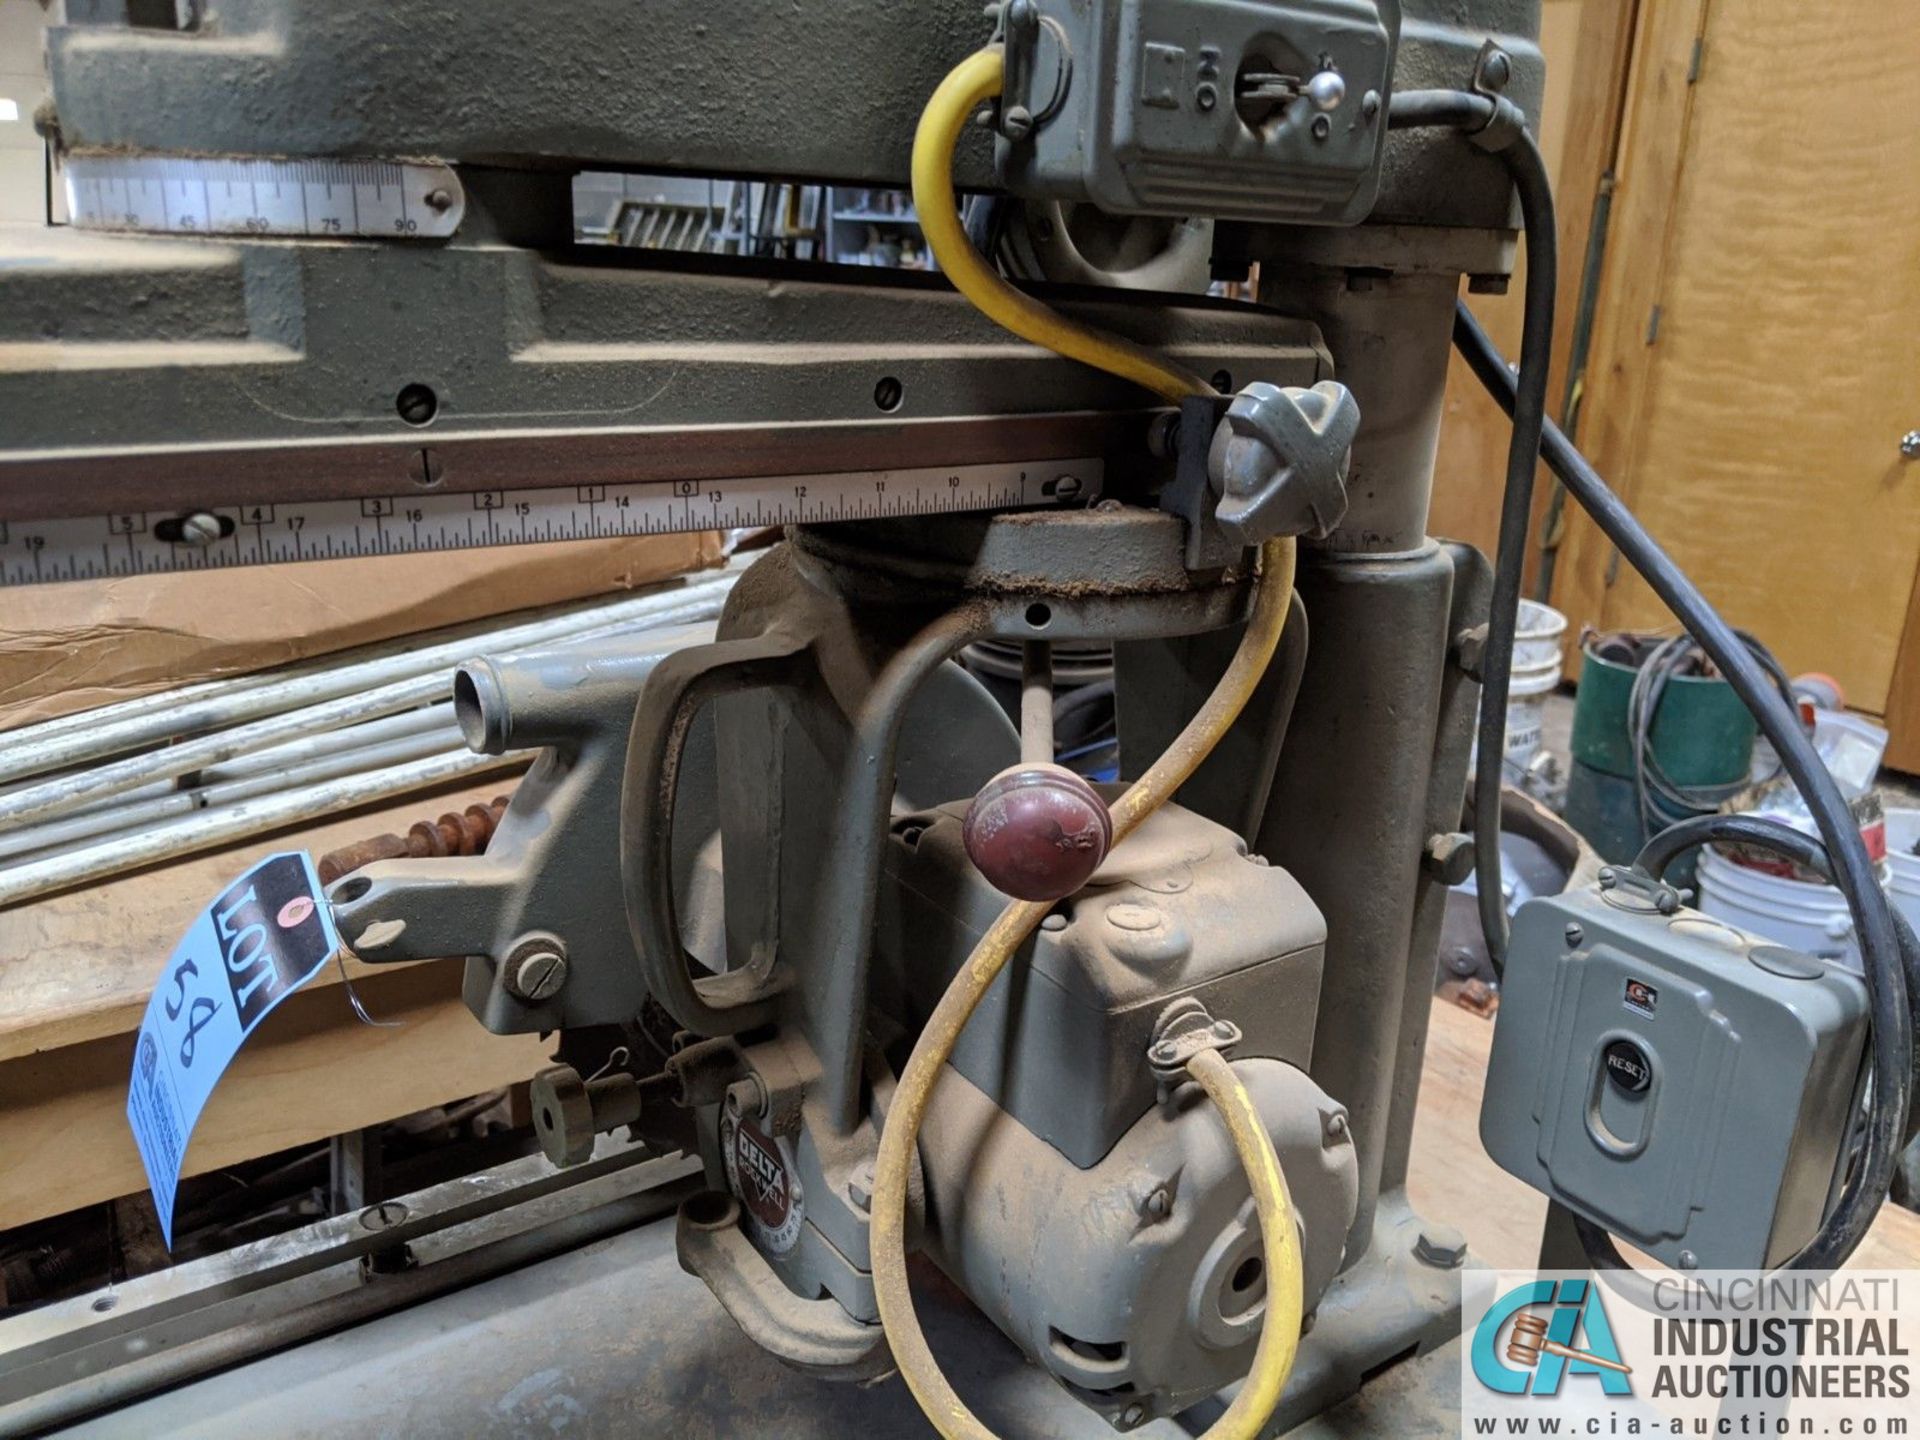 10" DELTA - ROCKWELL TABLE TOP RADIAL ARM SAW (8635 East Ave., Mentor, OH 44060 - John Magnasum: - Image 3 of 3